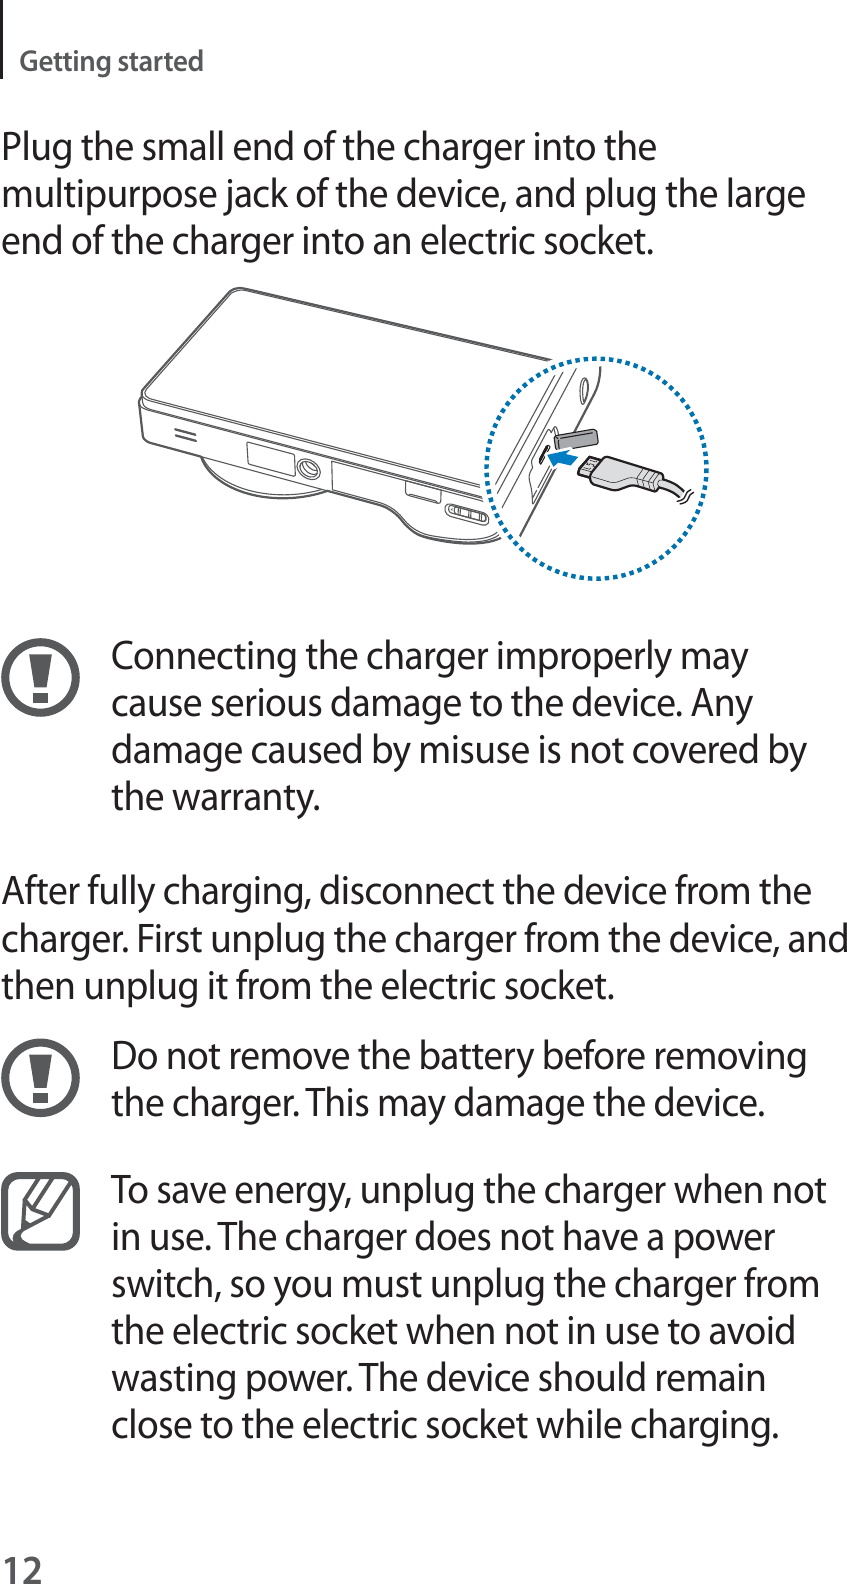 12Getting startedPlug the small end of the charger into the multipurpose jack of the device, and plug the large end of the charger into an electric socket.Connecting the charger improperly may cause serious damage to the device. Any damage caused by misuse is not covered by the warranty.After fully charging, disconnect the device from the charger. First unplug the charger from the device, and then unplug it from the electric socket.Do not remove the battery before removing the charger. This may damage the device.To save energy, unplug the charger when not in use. The charger does not have a power switch, so you must unplug the charger from the electric socket when not in use to avoid wasting power. The device should remain close to the electric socket while charging.